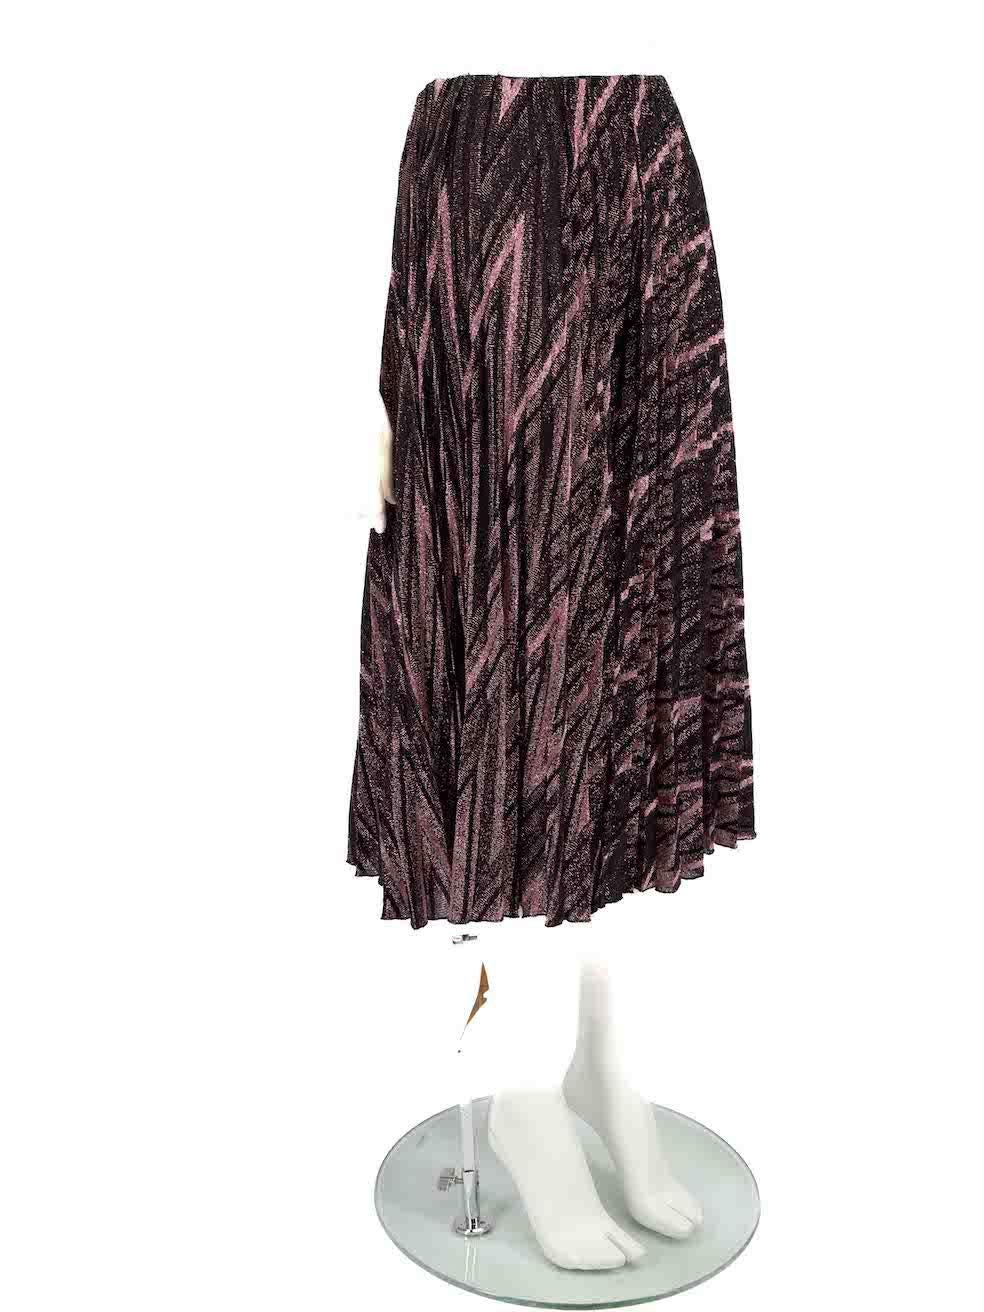 CONDITION is Very good. Hardly any visible wear to skirt is evident on this used M by Missoni designer resale item.
 
 
 
 Details
 
 
 Purple metallic
 
 Cotton
 
 Skirt
 
 Midi
 
 Pleated
 
 Zigzag pattern
 
 Elasticated waistband
 
 
 
 
 
 Made